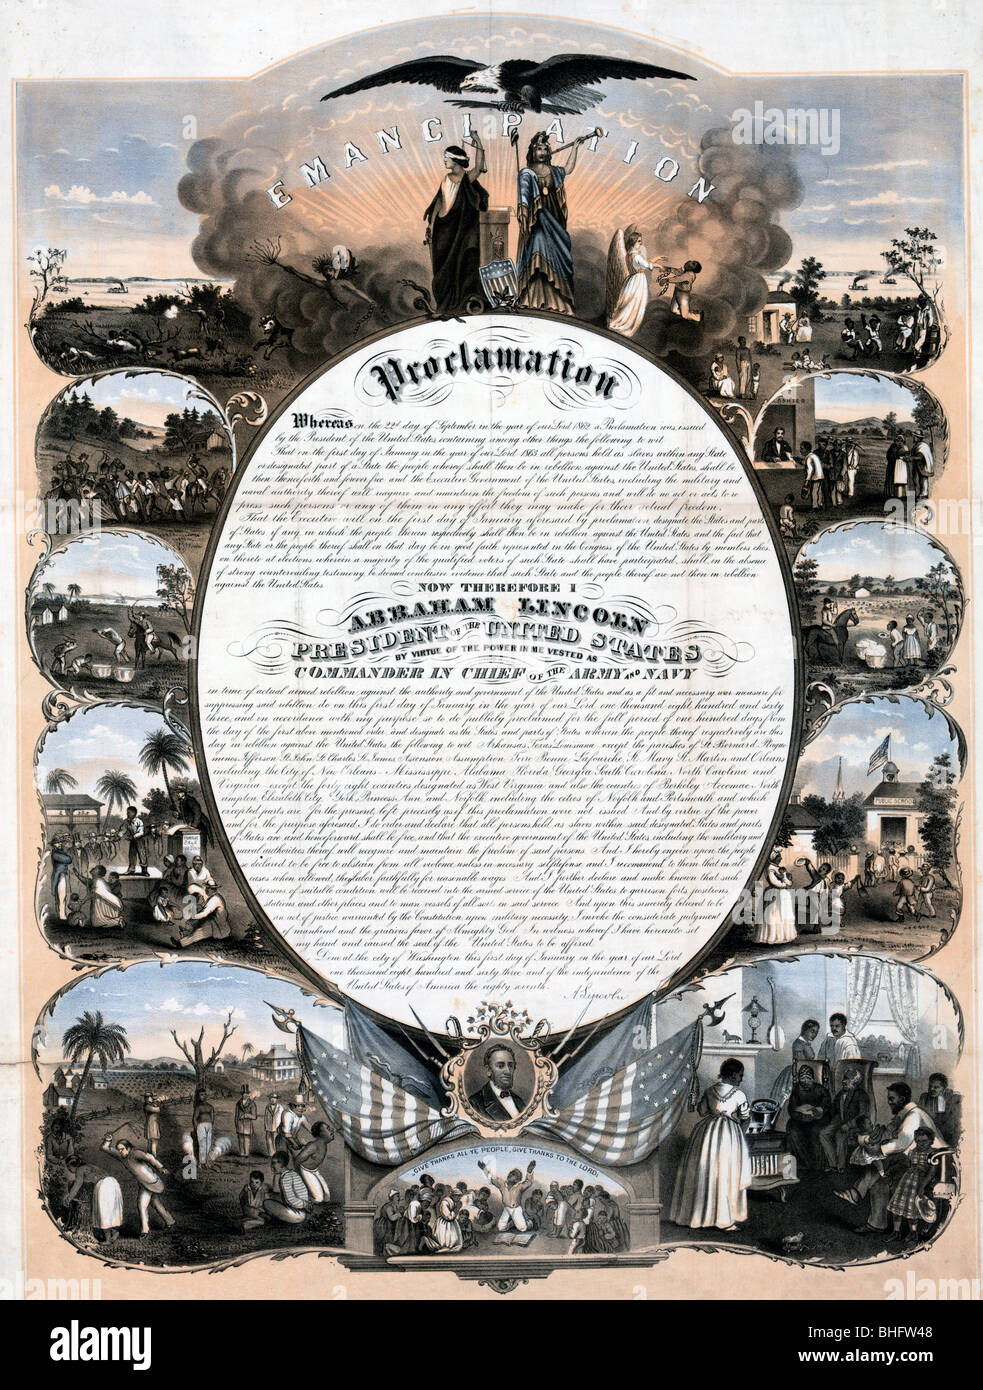 The Emancipation Proclamation, issued January 1st, 1863,  with various scenes of slave life in the United States America Stock Photo